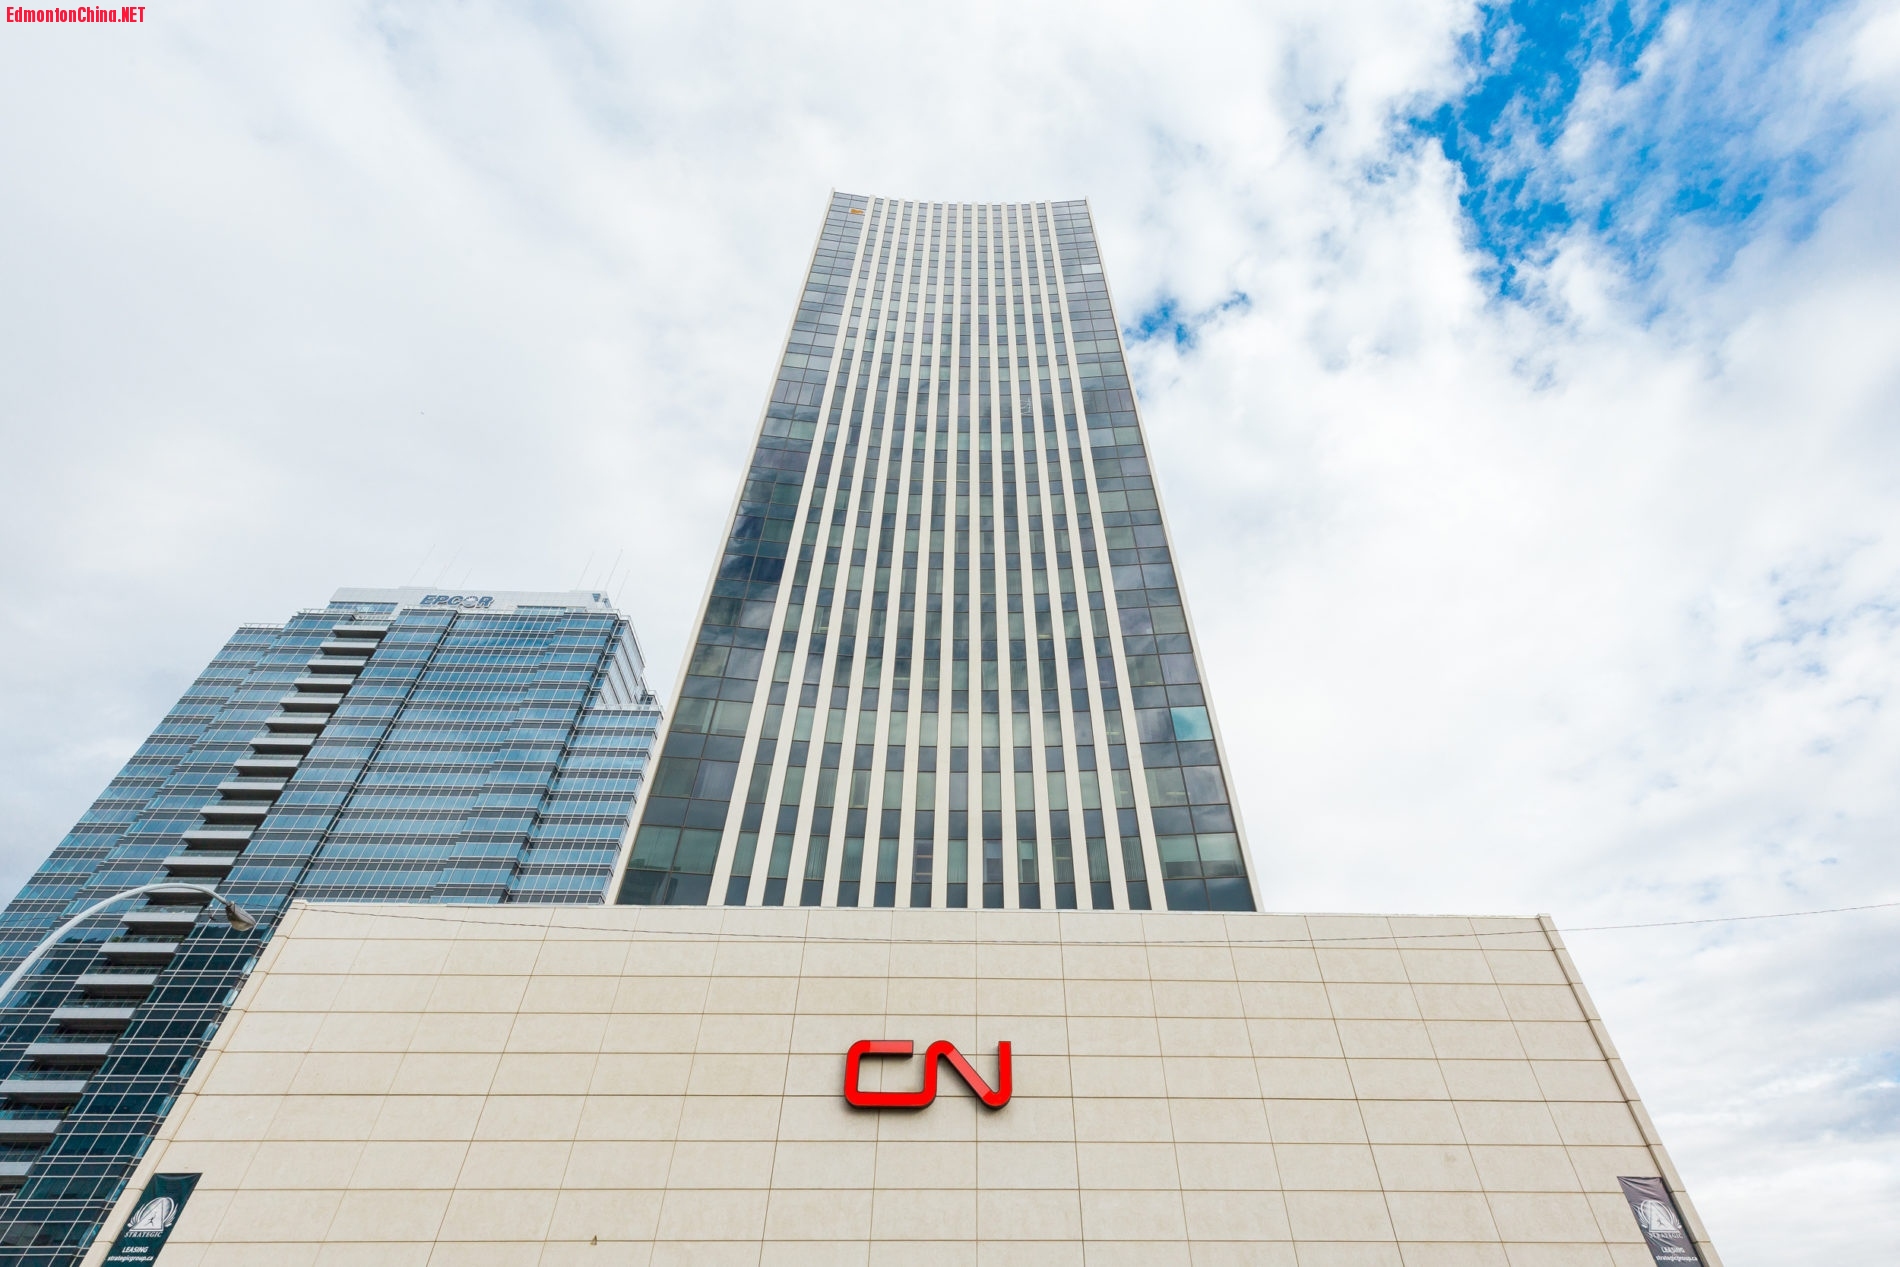 cn-tower-in-edmonton-10-cash-sale-submitted.jpg